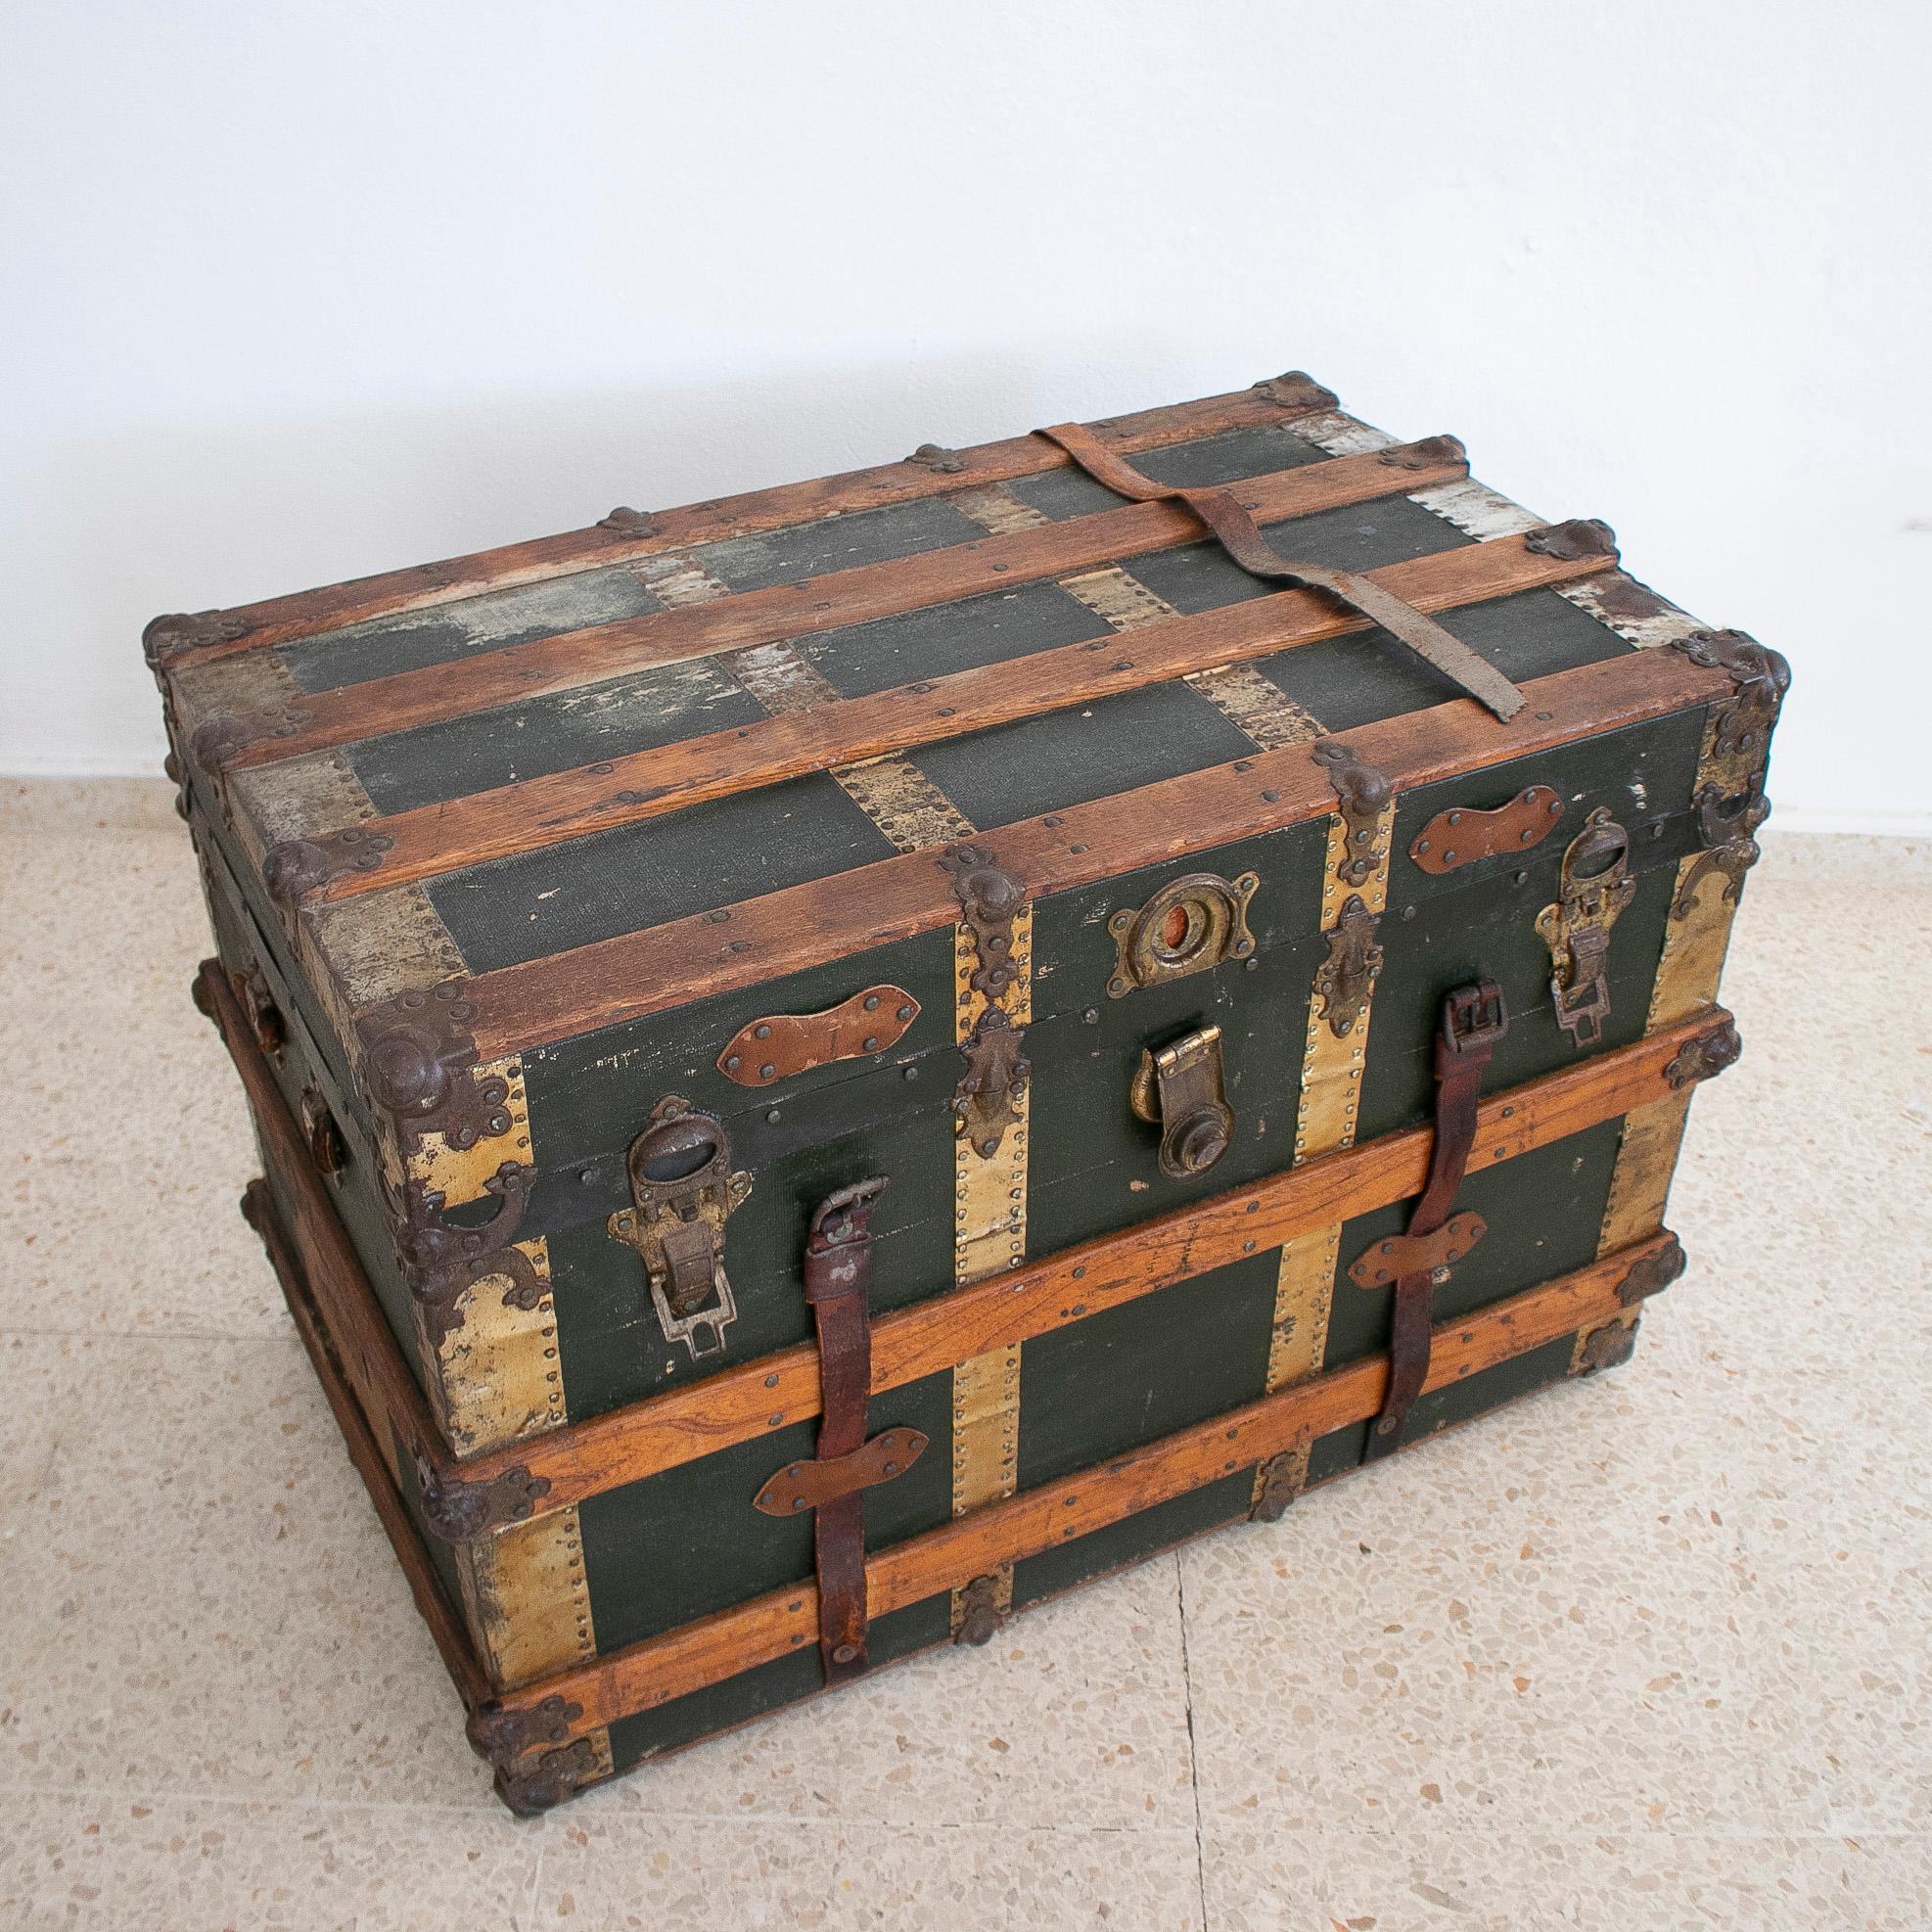 Vintage 1940s Spanish leather & wood travel trunk with initials.